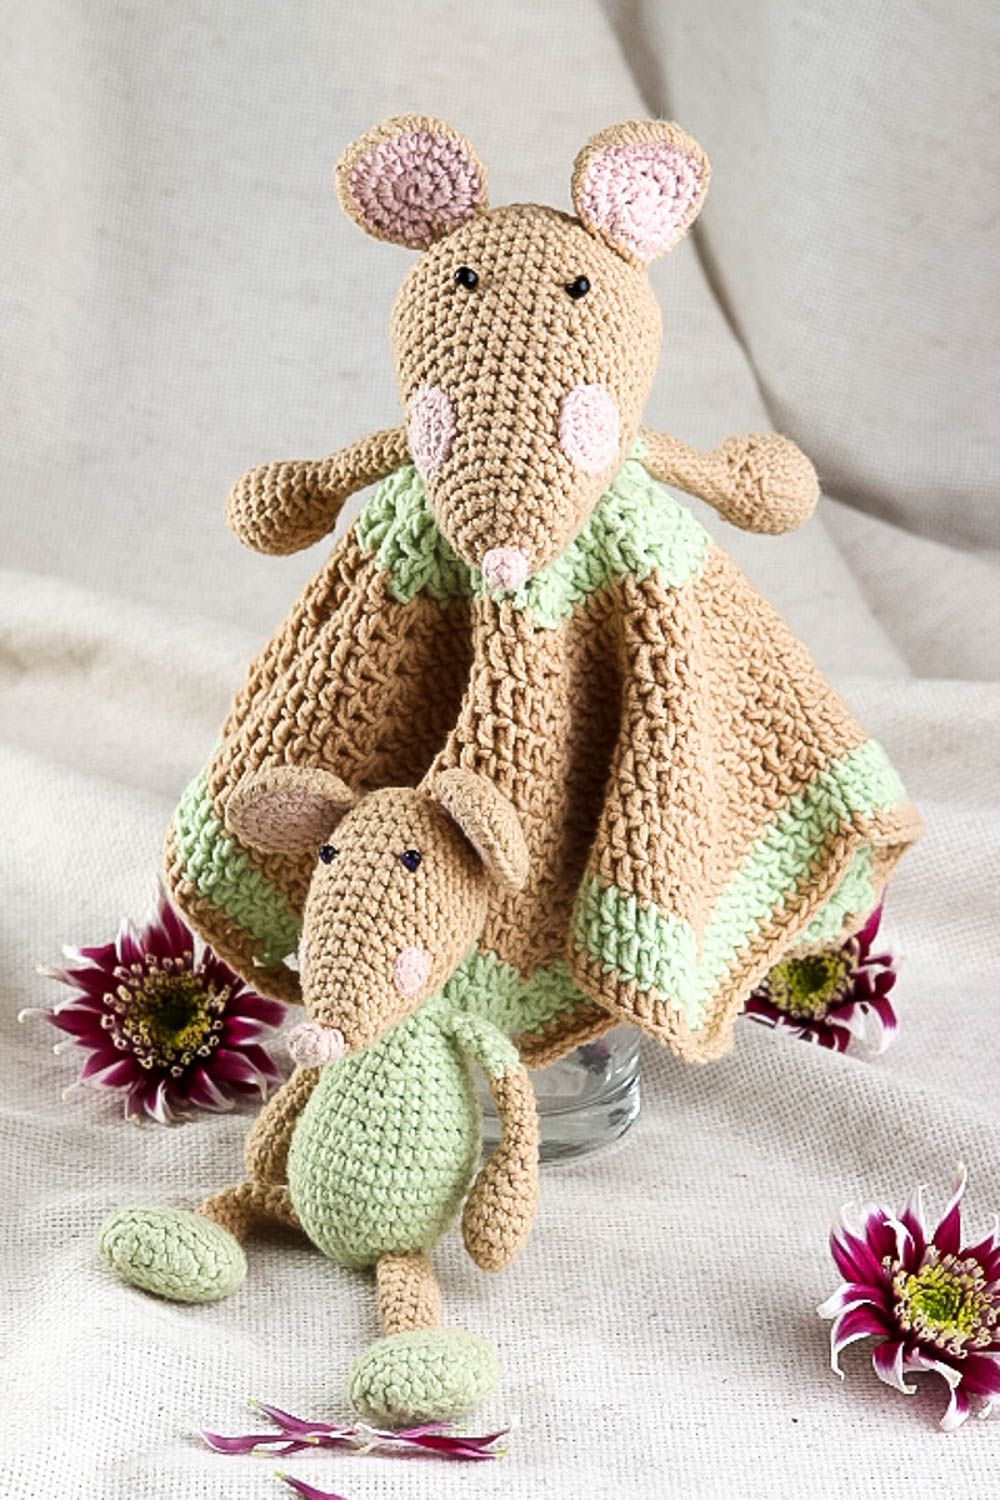 Handmade crocheted soft toy for babies nursery decor ideas soft toy for children photo 1